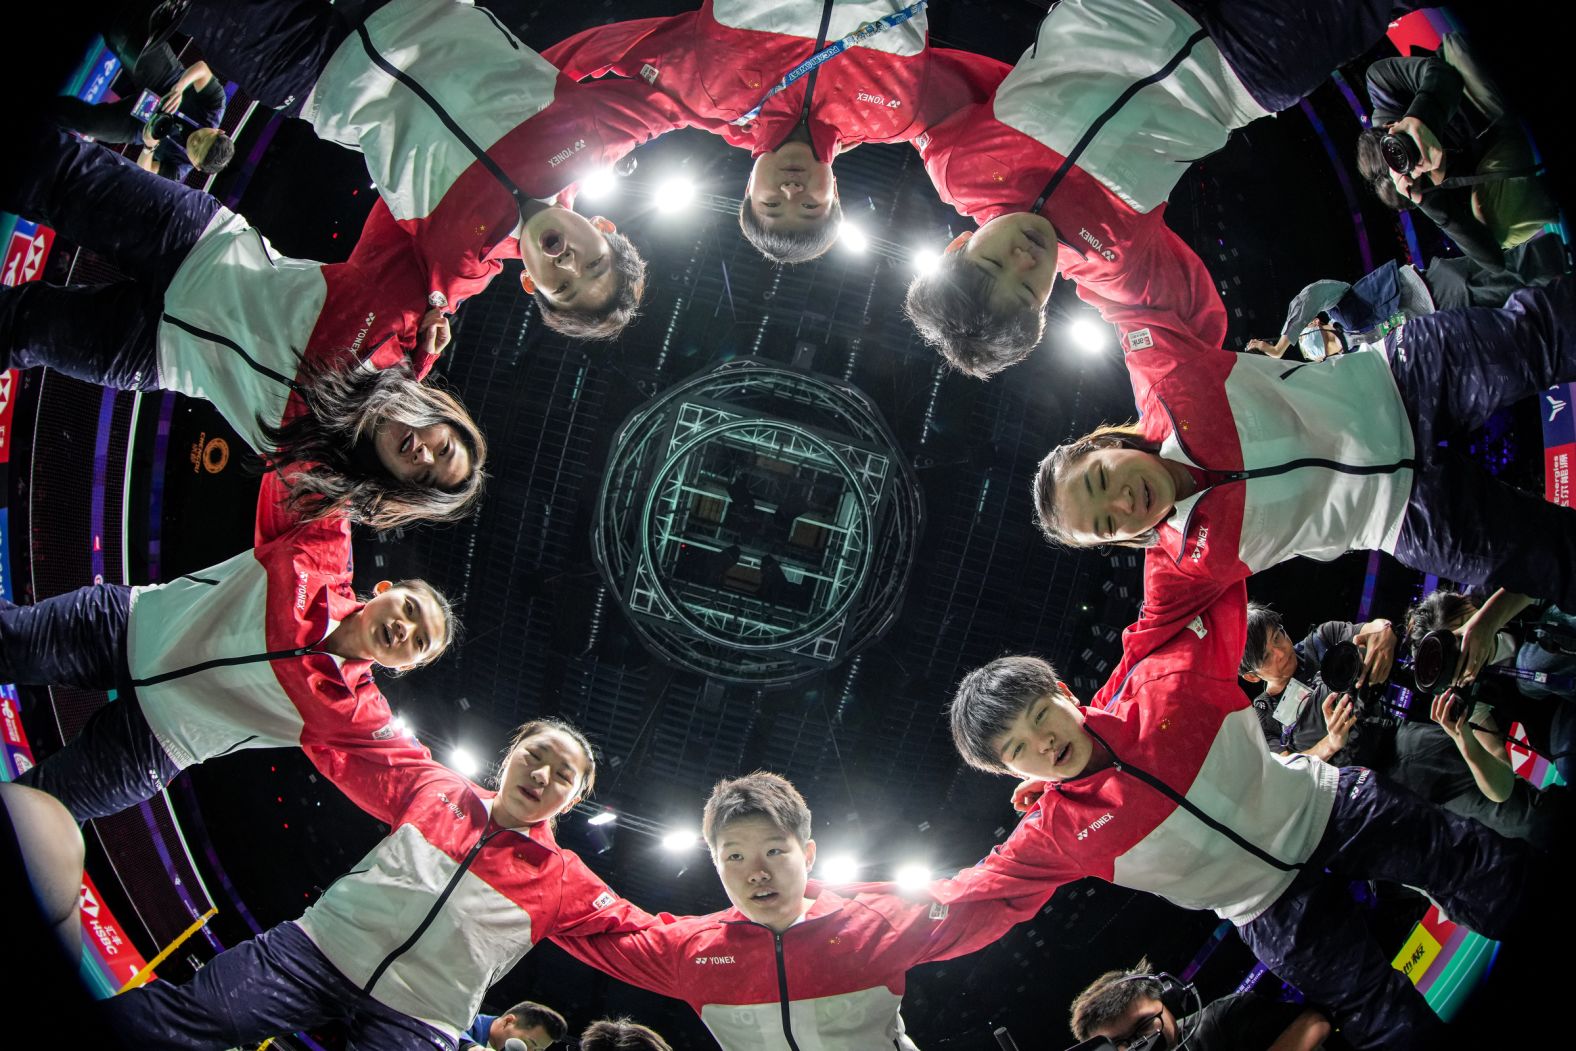 China's badminton team huddles before a match against India at the Thomas and Uber Cup Finals on Tuesday, April 30.